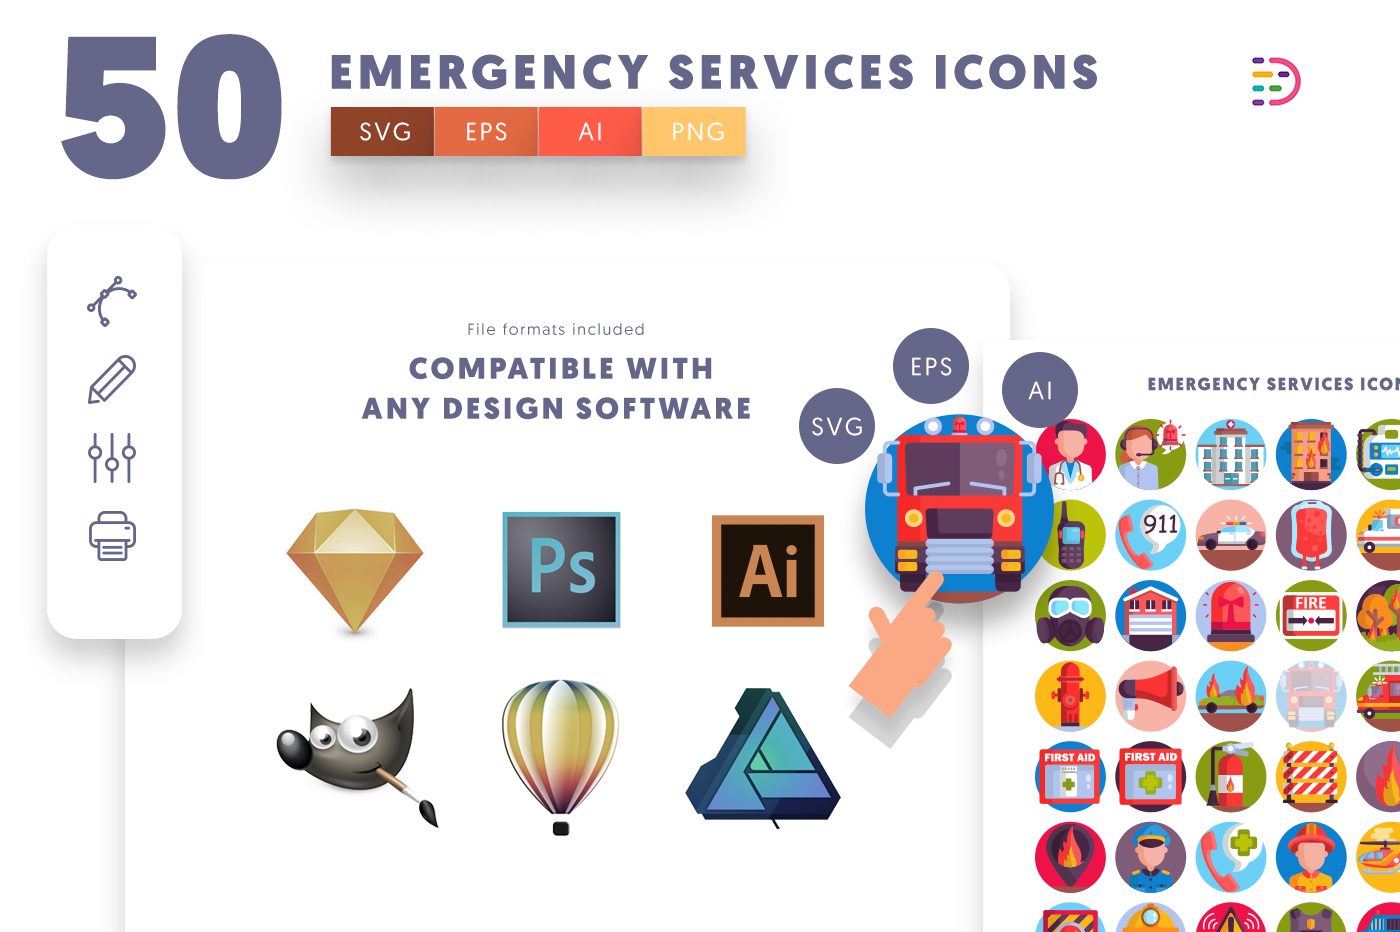  full vector 50 Emergency Services Icons EPS, SVG, PNG